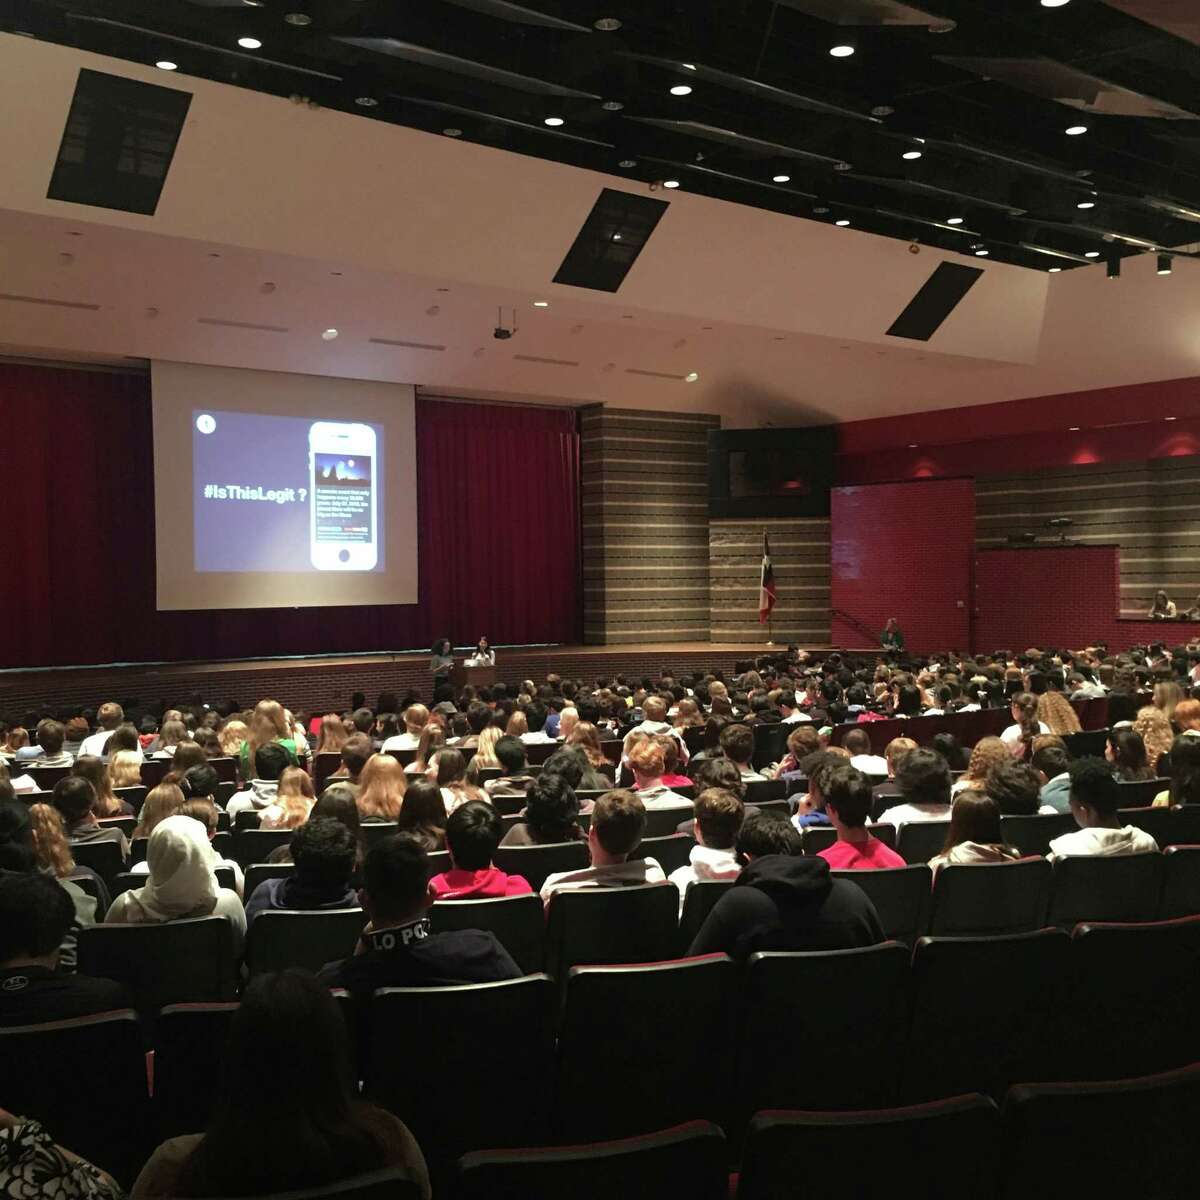 A presentation by nonprofit MediaWise on Tuesday, Jan 8, taught about 650 Memorial High School sophomores and journalism students how to fact-check what they read online. MediaWise plans to educate 1 million teens across the nation about the issue by 2020.